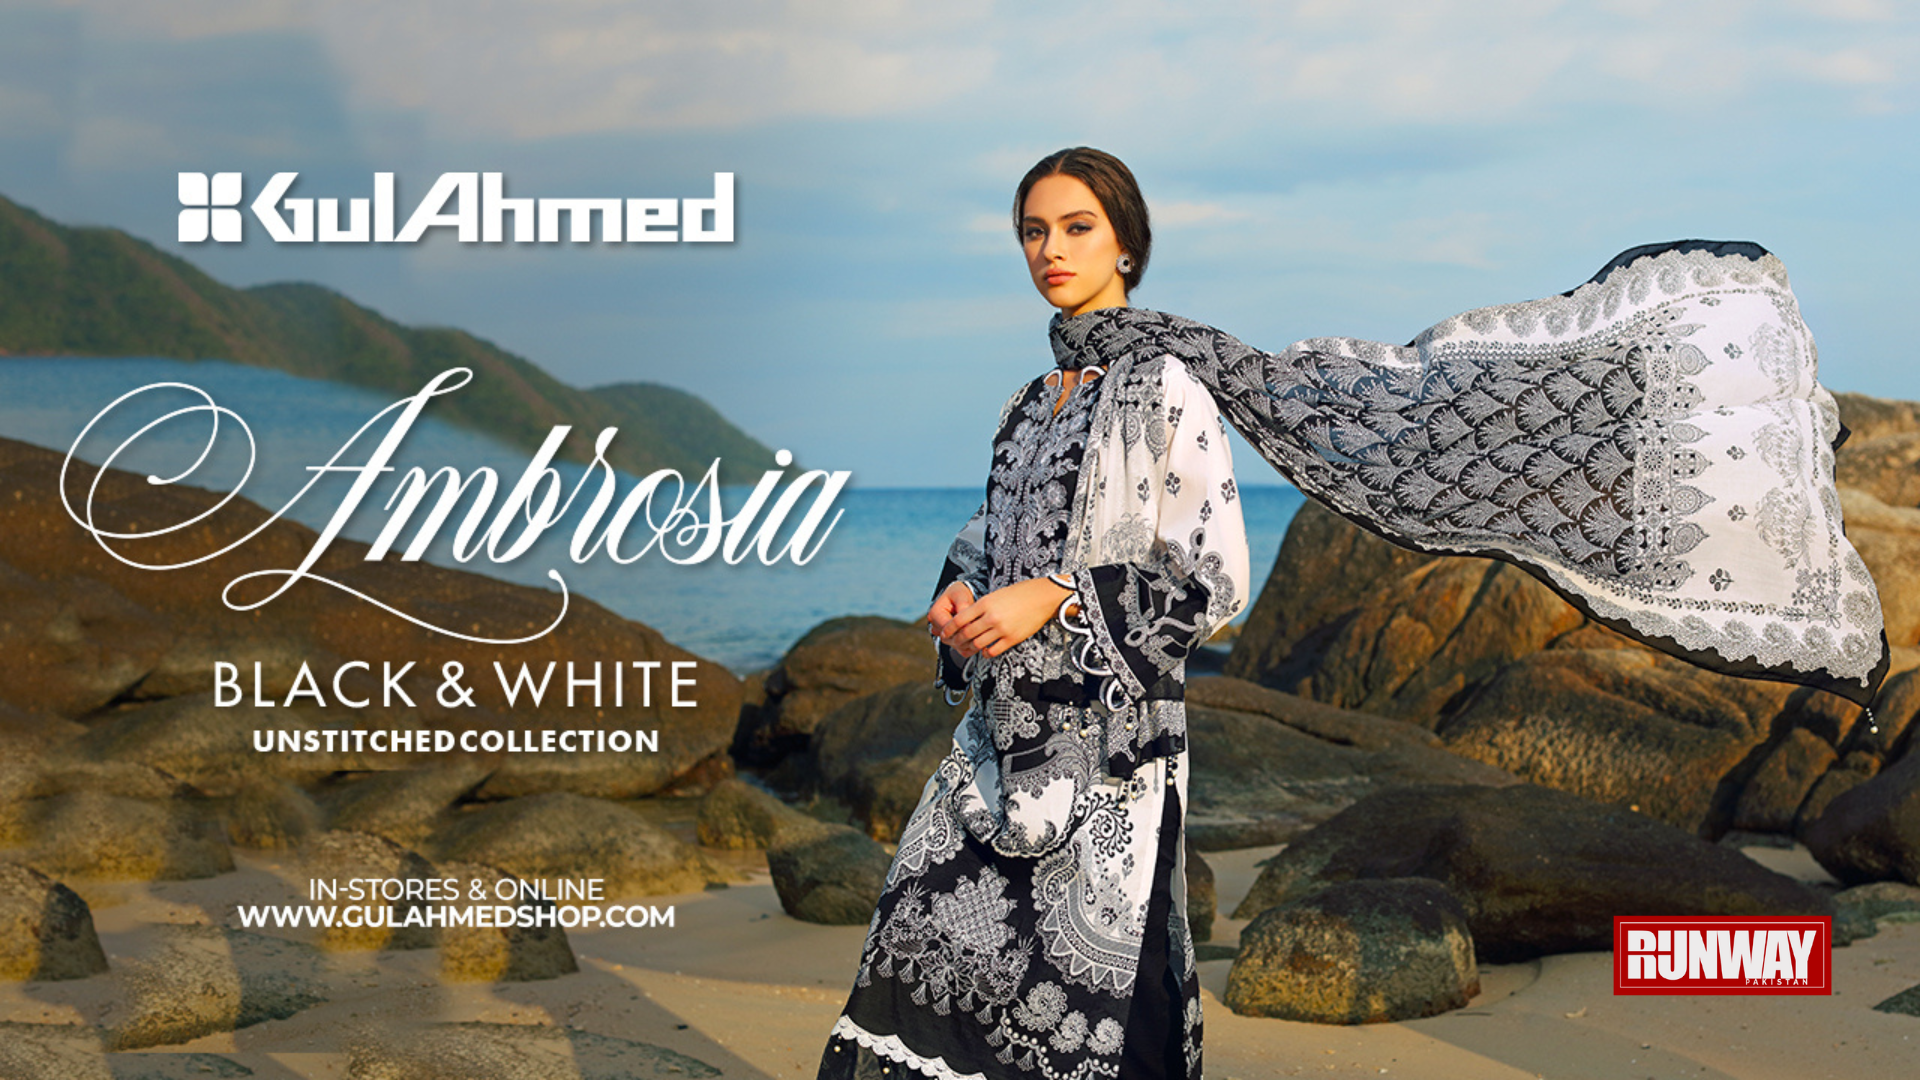 Ambrosia Black & White Collection by GulAhmed